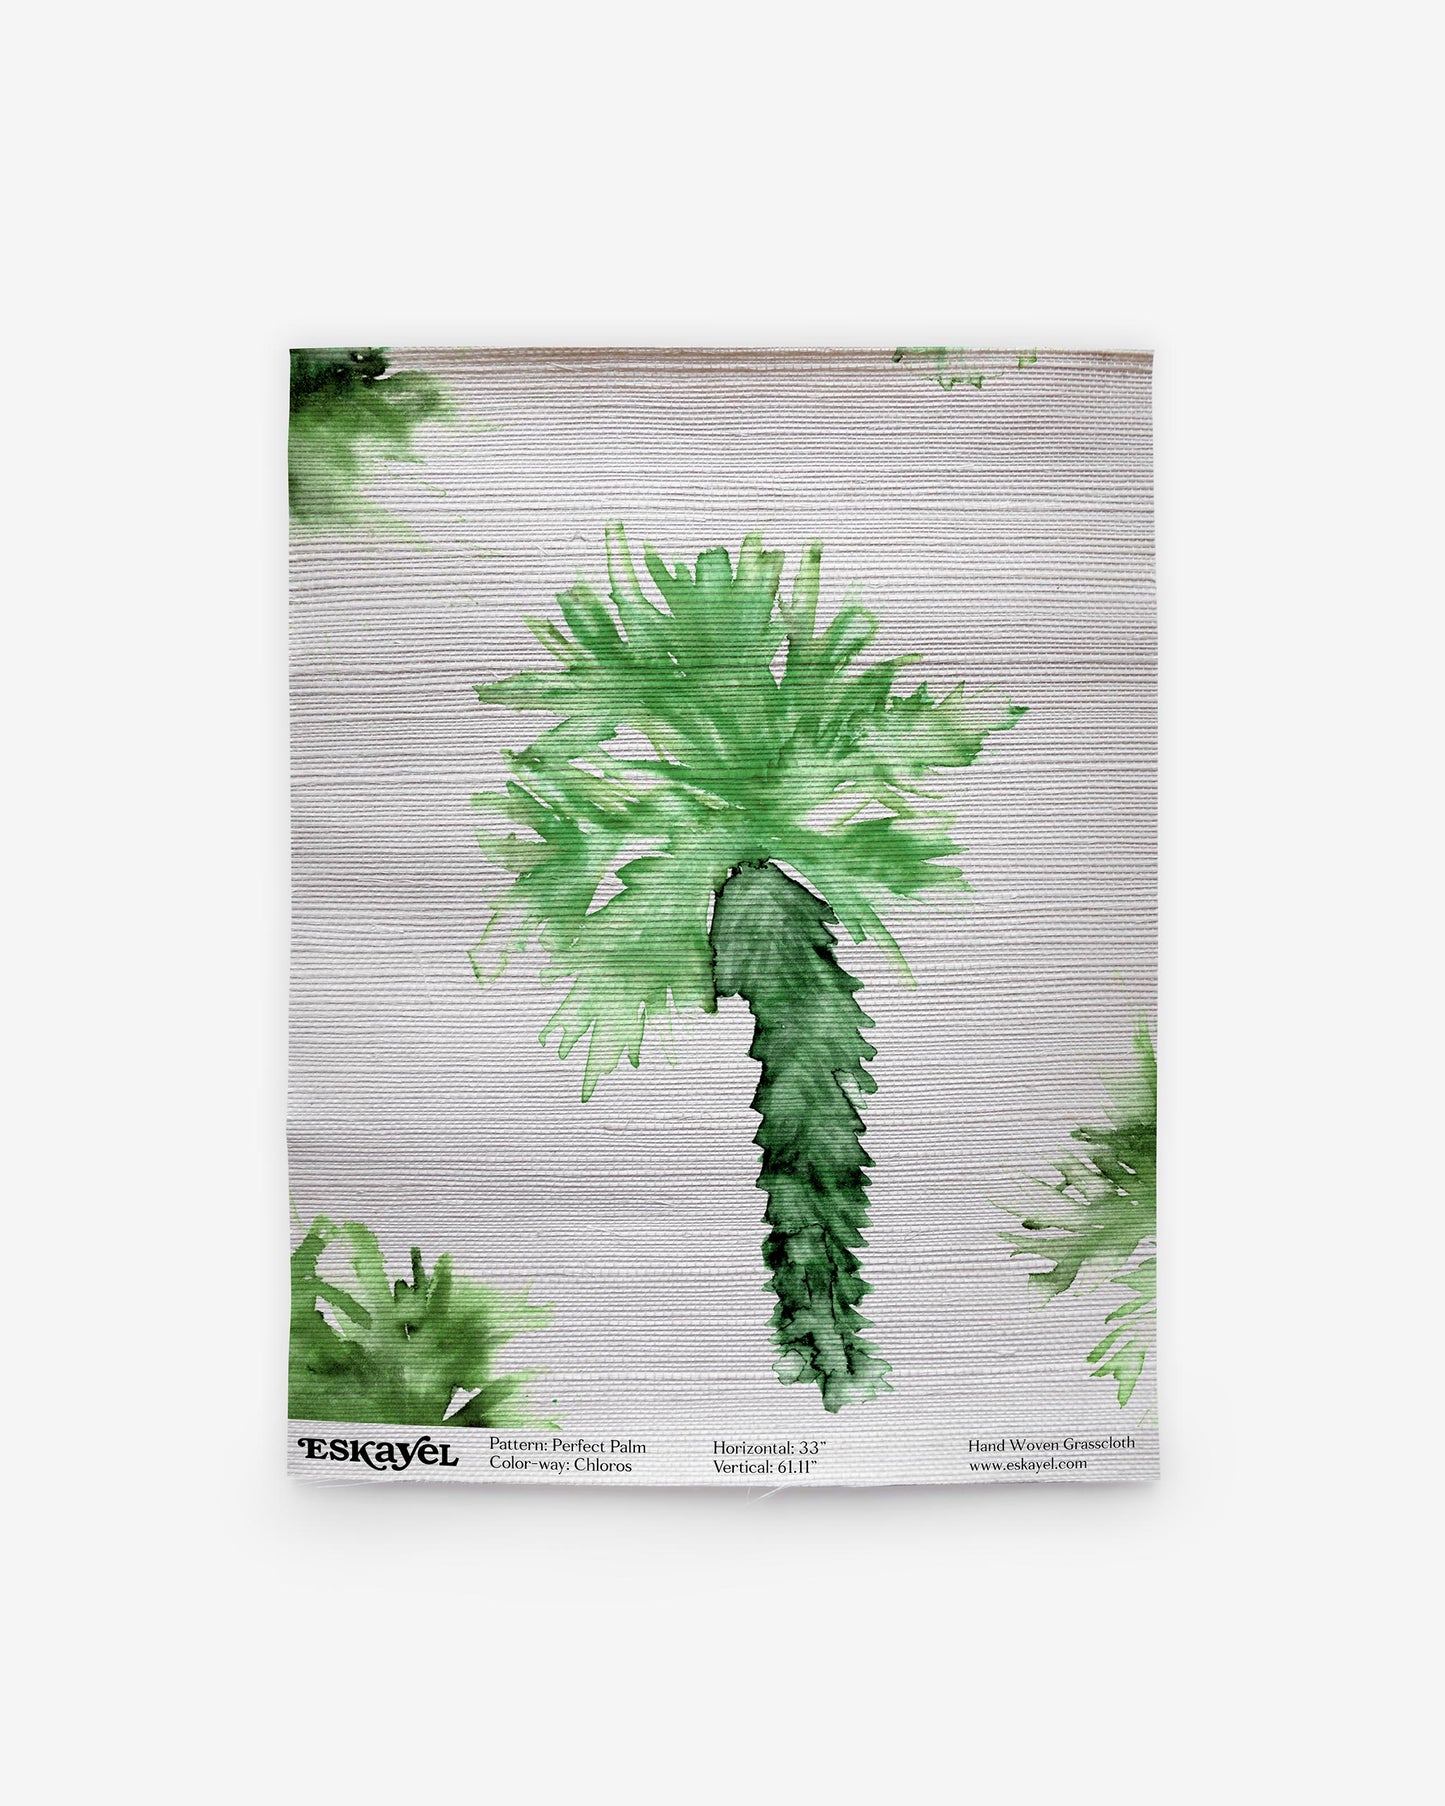 A green Perfect Palm Grasscloth palm tree with a surfing figurative pattern on wallpaper